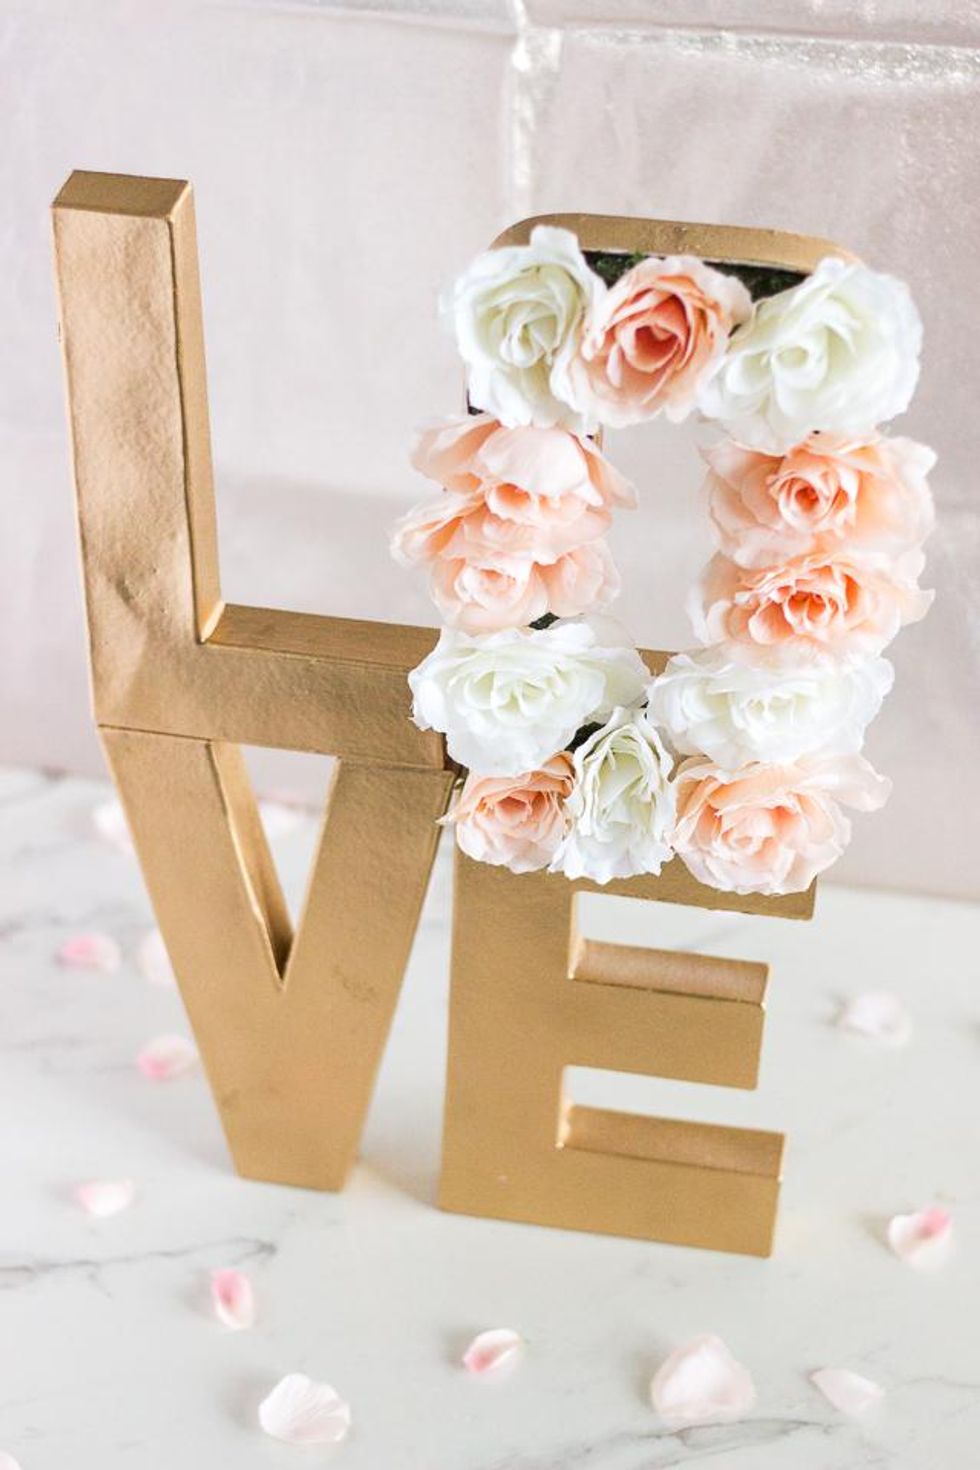 How to make paper mache floral letter centerpiece - B+C Guides